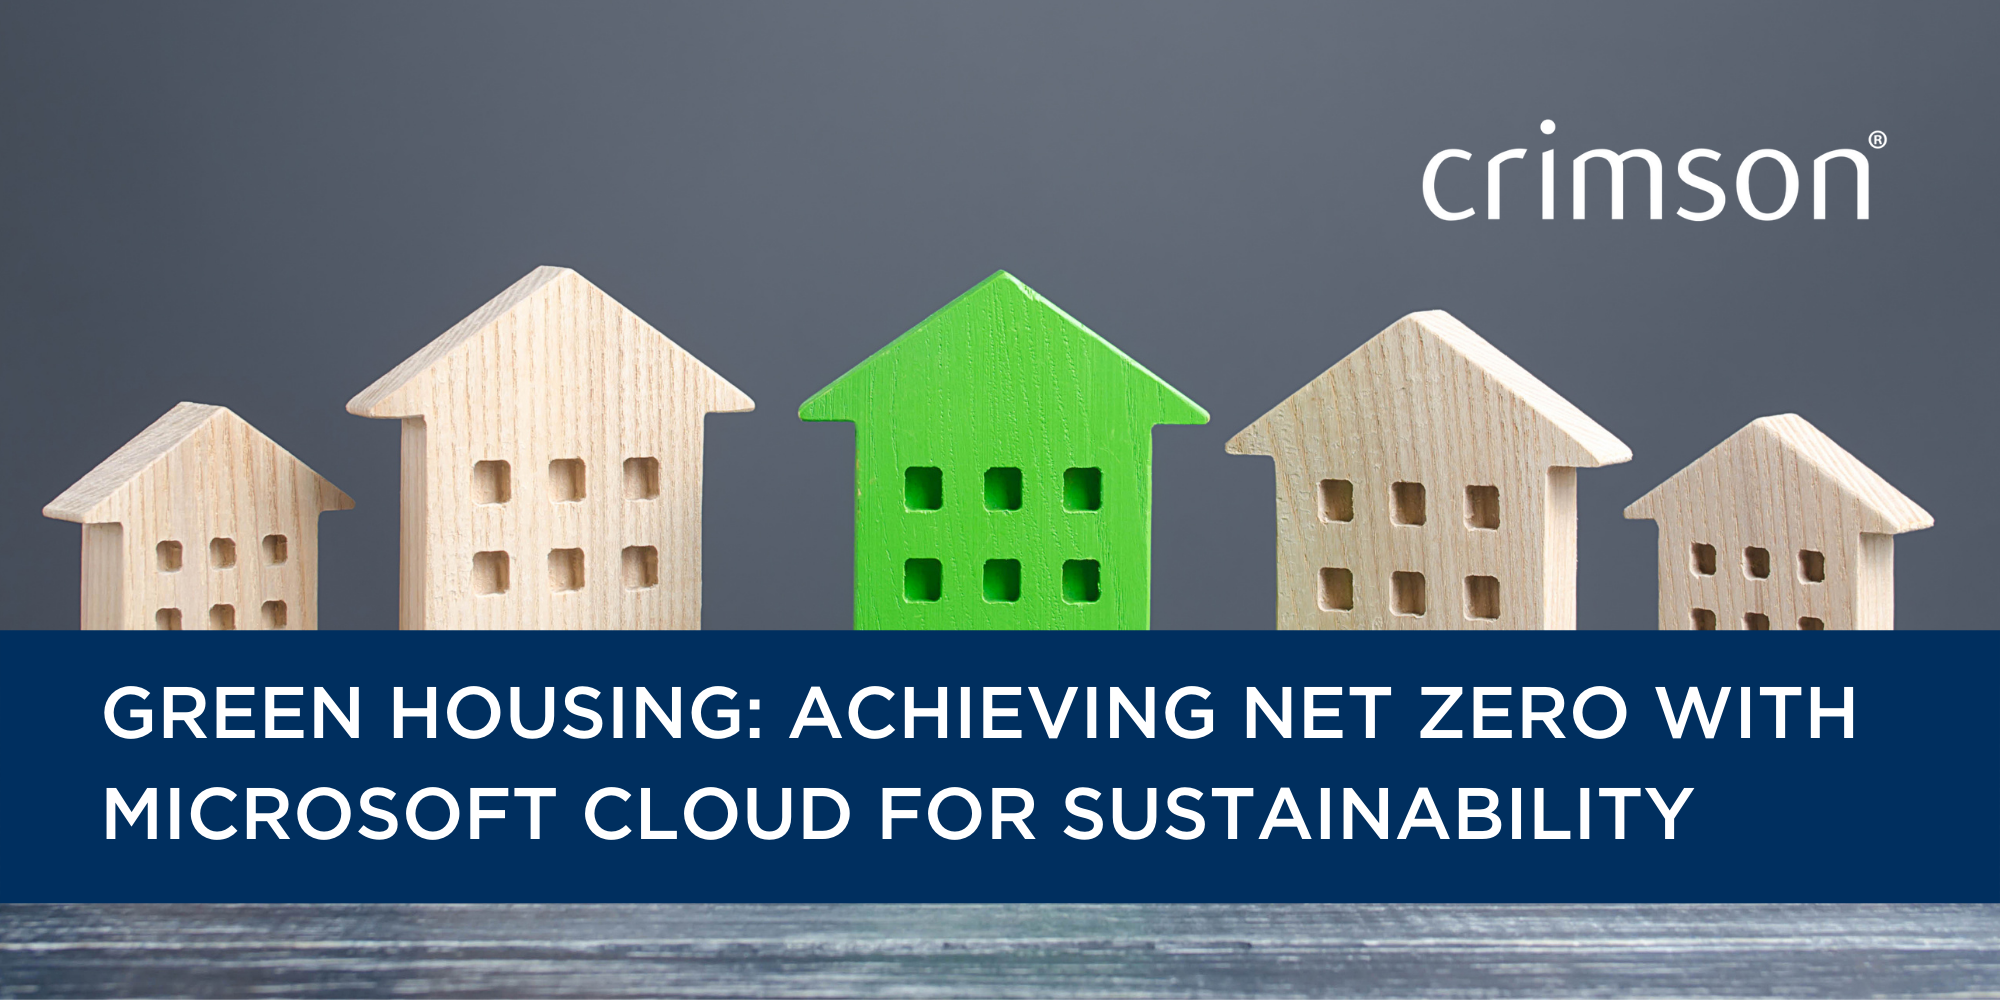 Green Housing: Achieving Net Zero with Microsoft Cloud for Sustainability